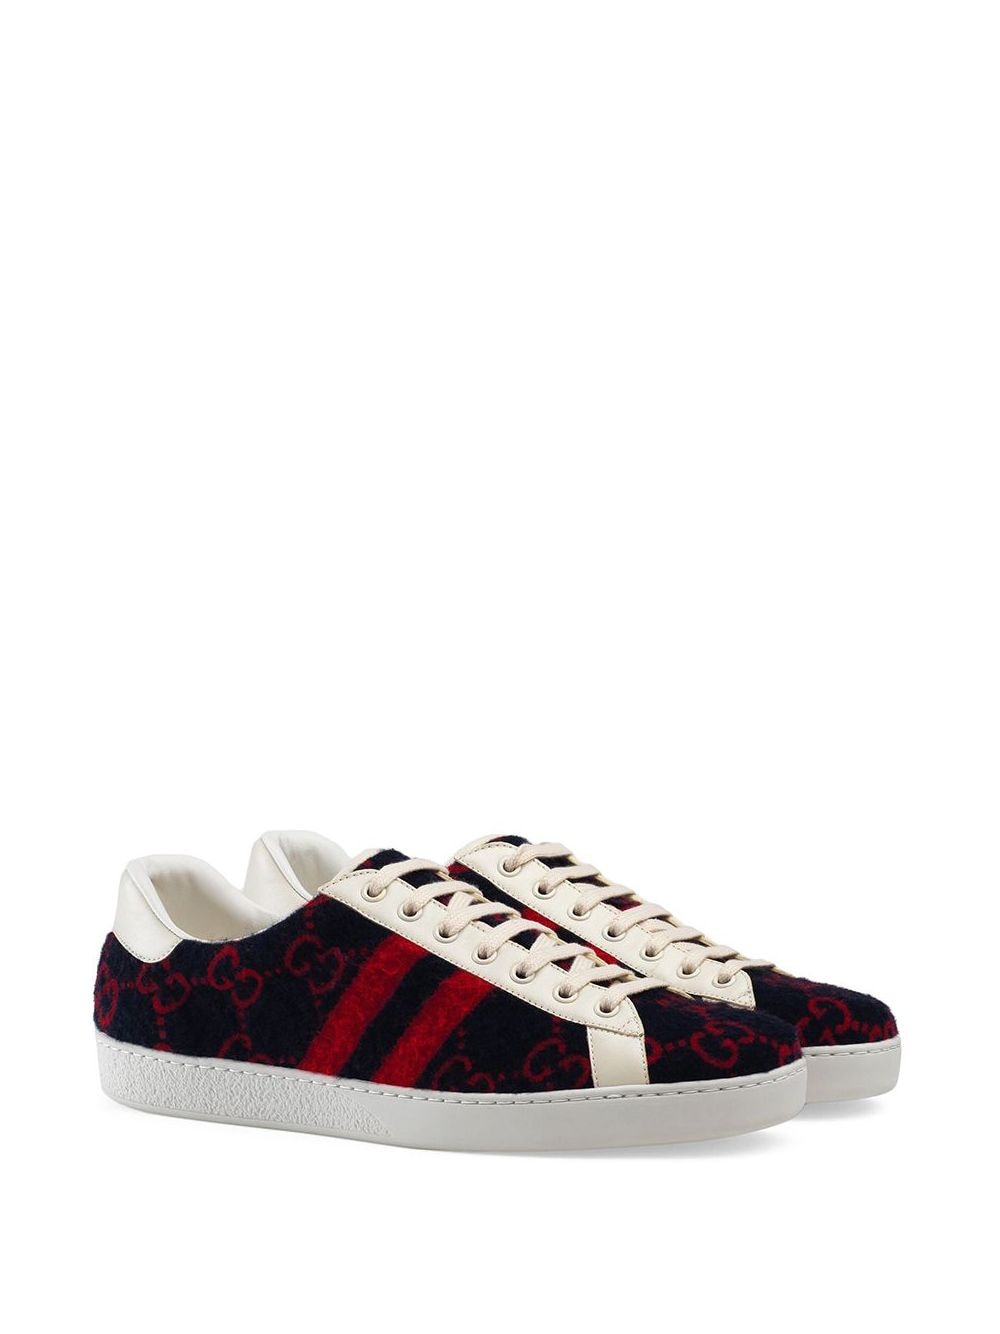 gucci ace sneaker with wool